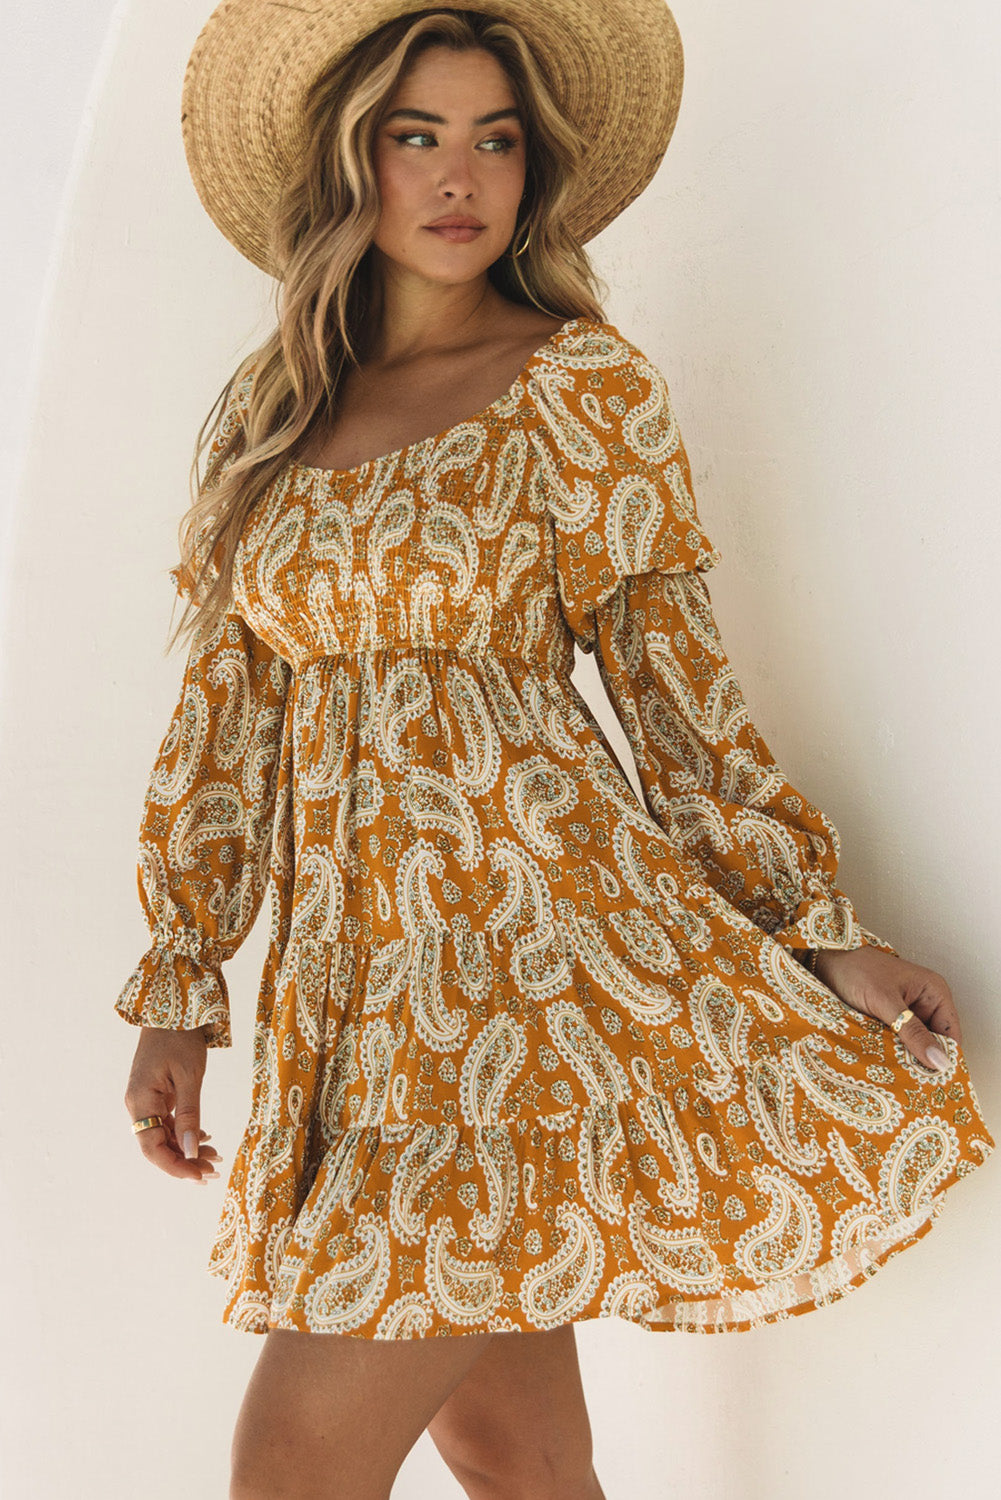 The802Gypsy  Dresses TRAVELING GYPSY-Paisley Long Sleeve Floral Dress